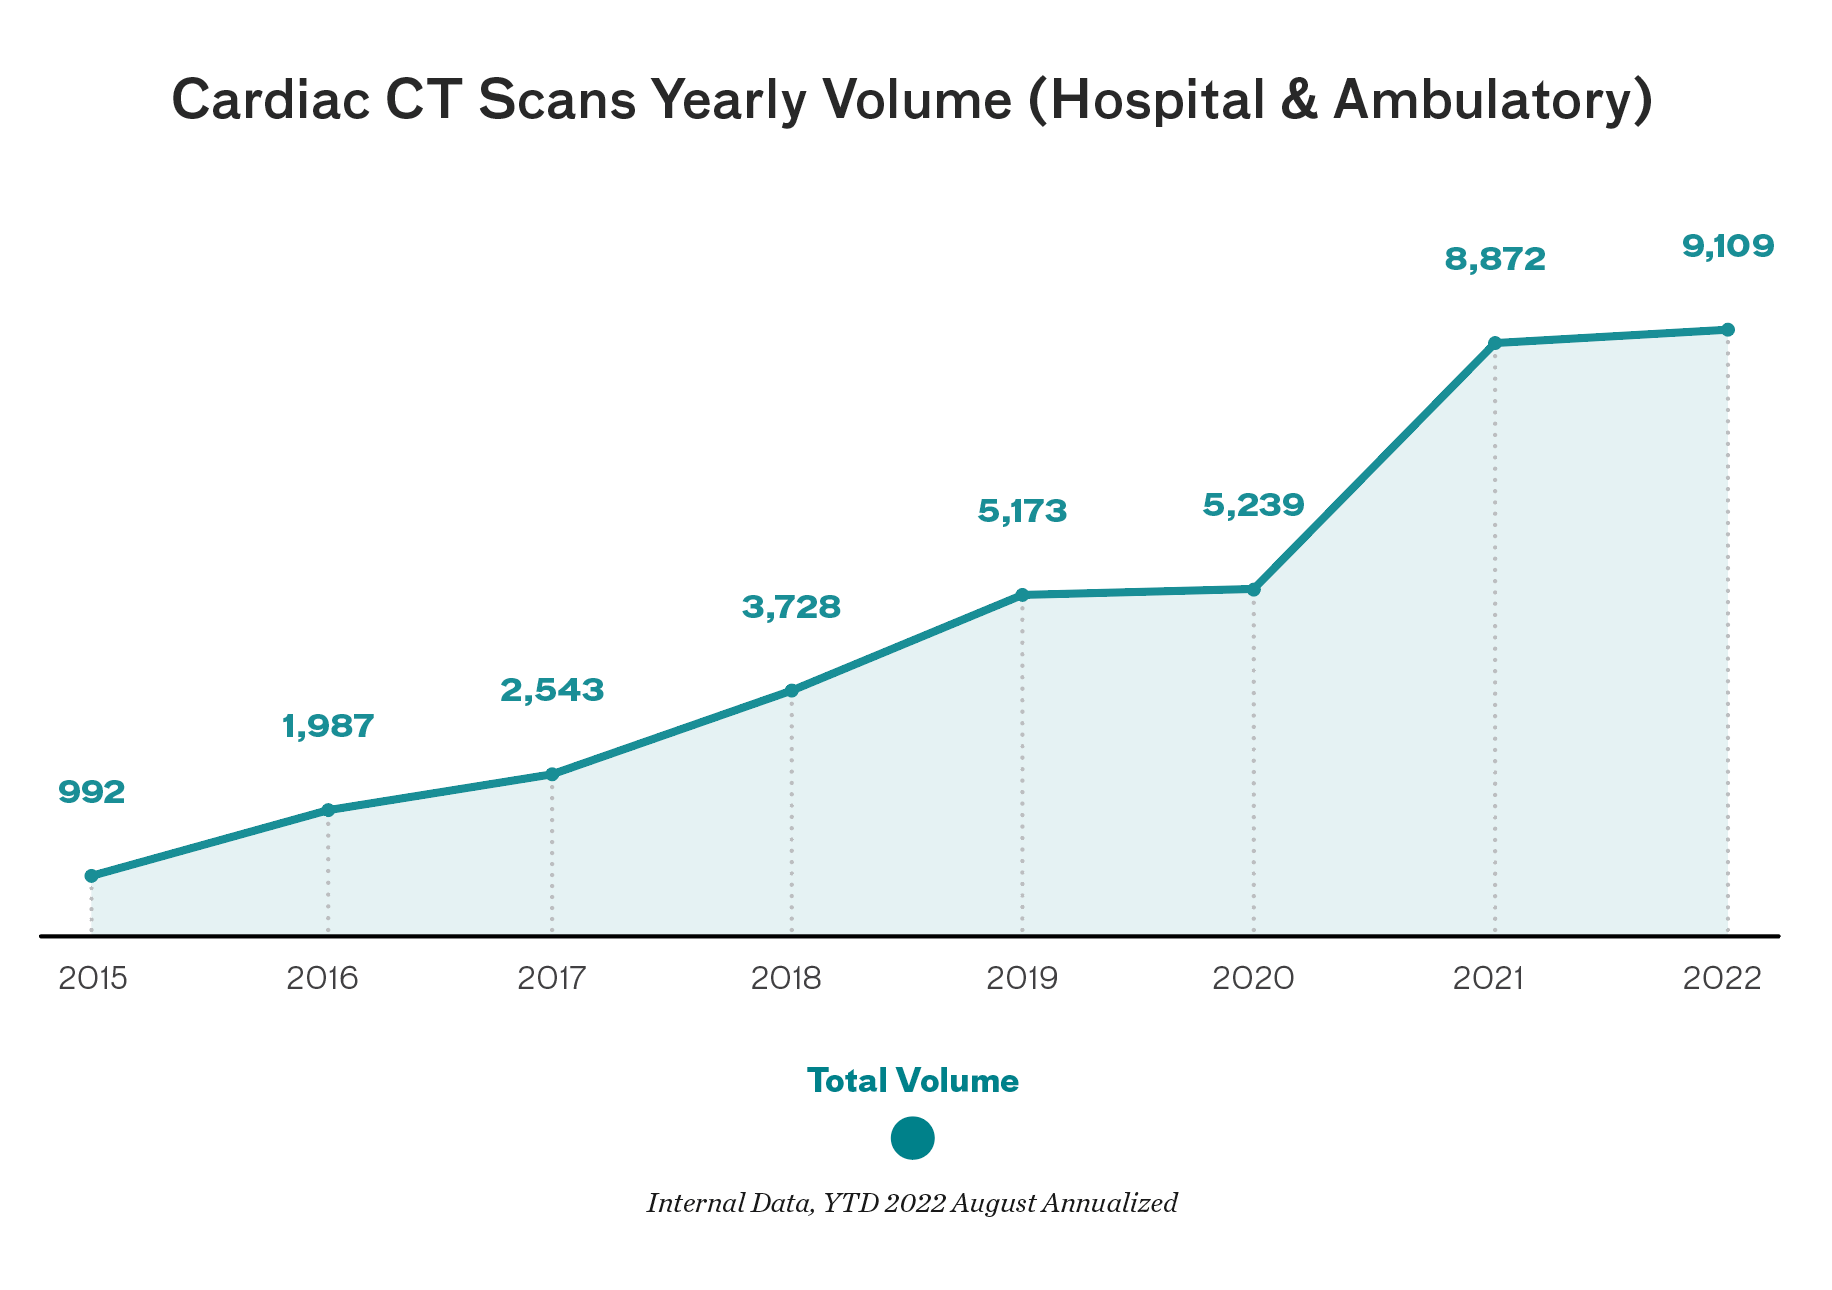 Chart showing an increase in Cardiac CT Scans Yearly Volume (Hospital & Ambulatory).